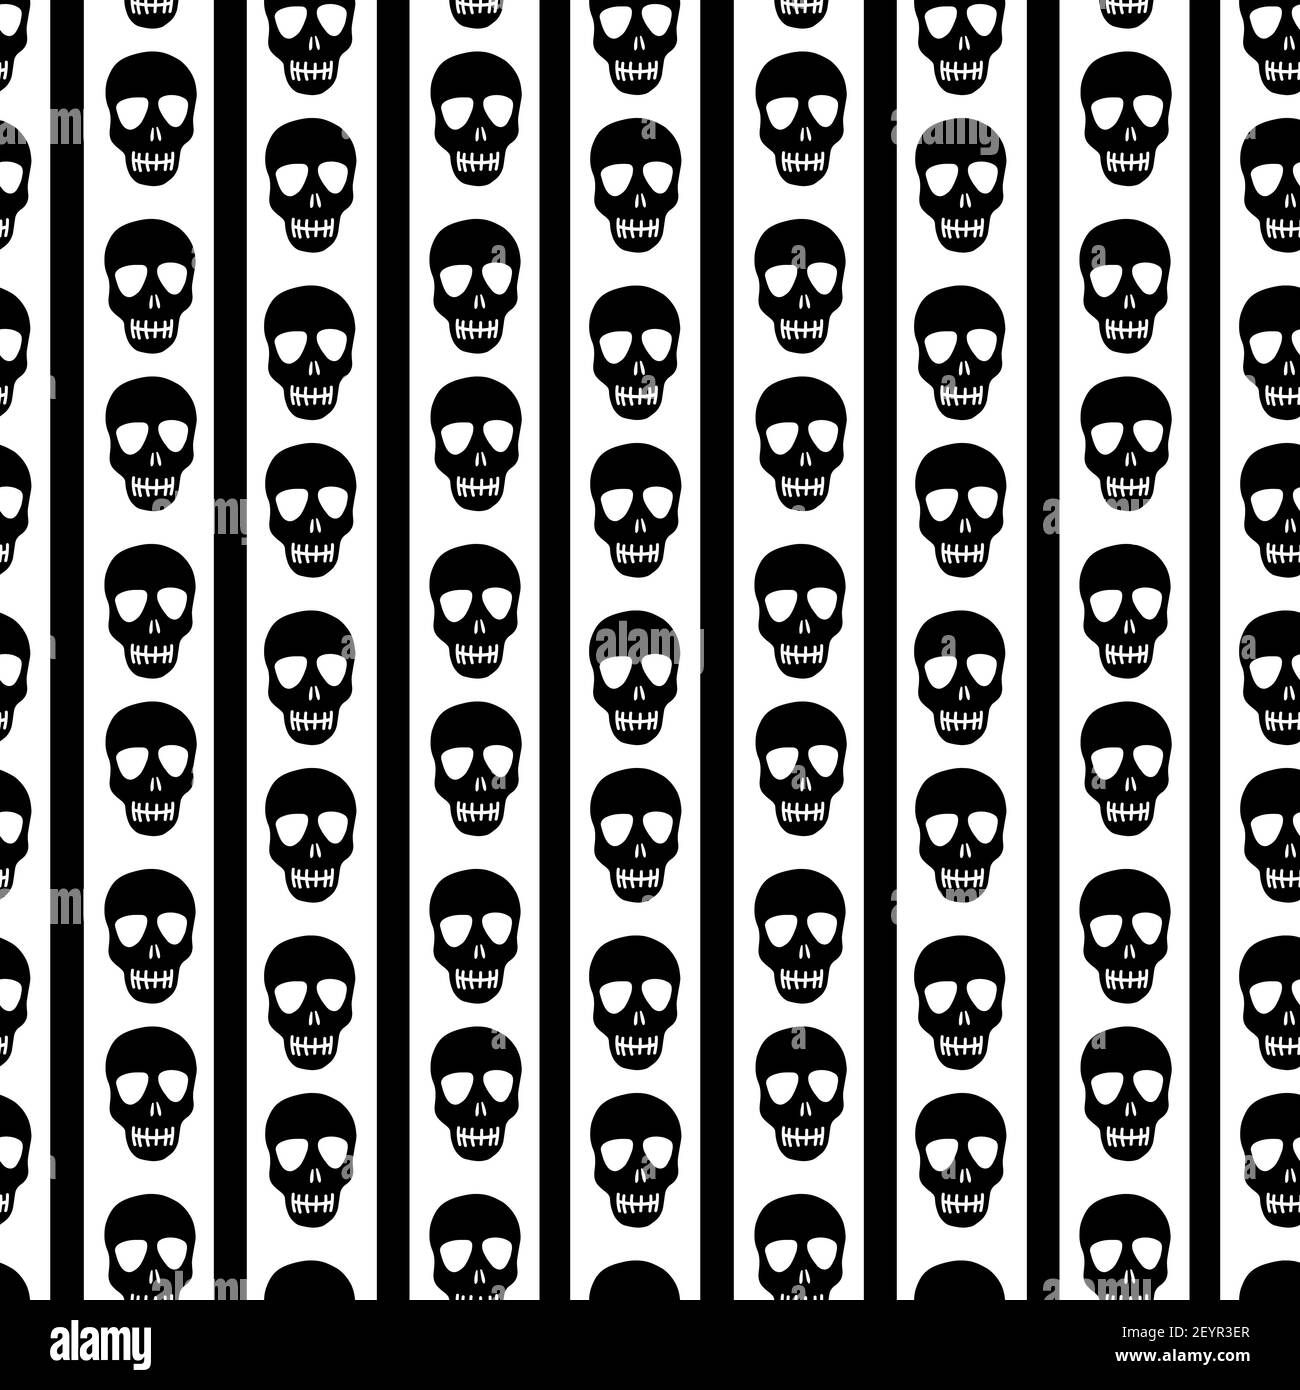 Skull pattern on a black and white background Stock Vector